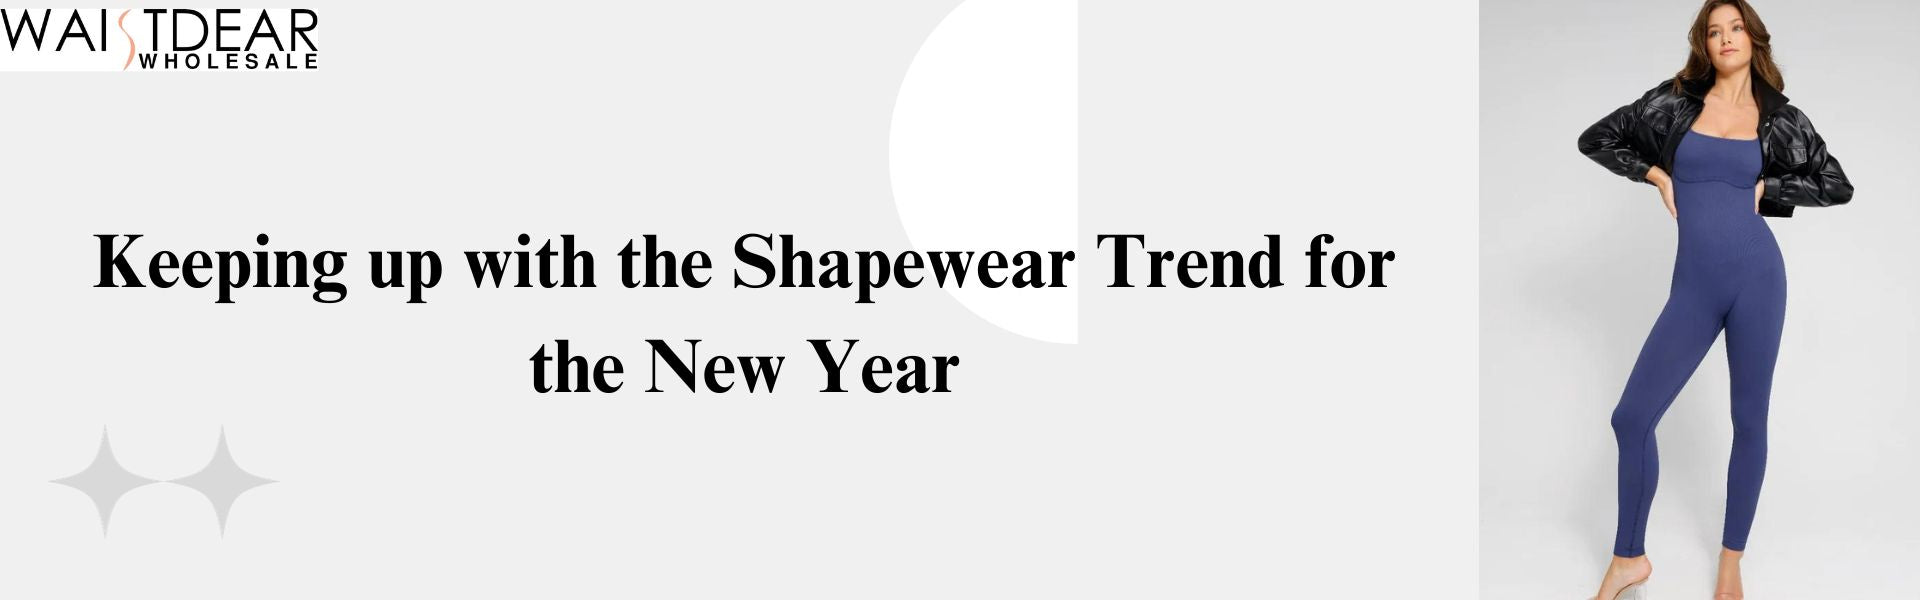 Keeping up with the Shapewear Trend for the New Year